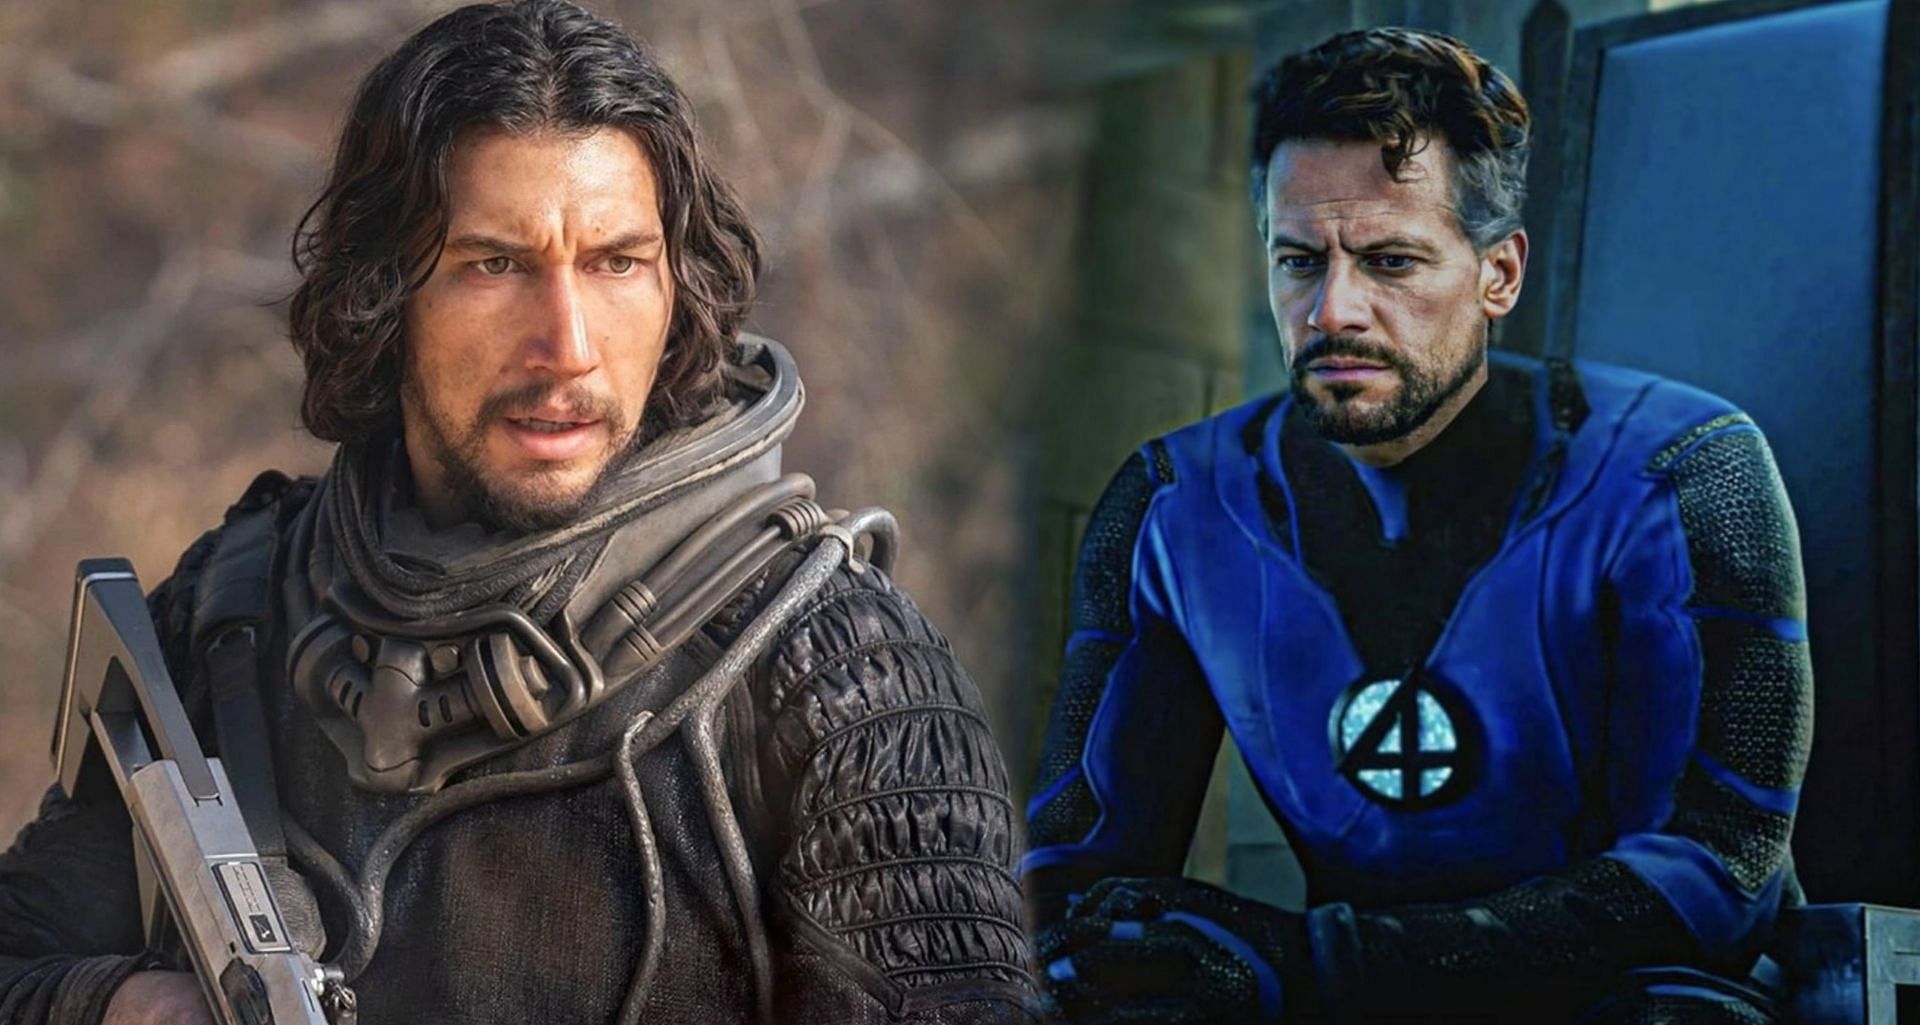 Adam Driver has recently turned down an offer from Marvel Studios by rejecting to play the role of Reed Richards, also known as Mr. Fantastic in the highly anticipated Fantastic Four film within the MCU. (Image Via Sportskeeda)